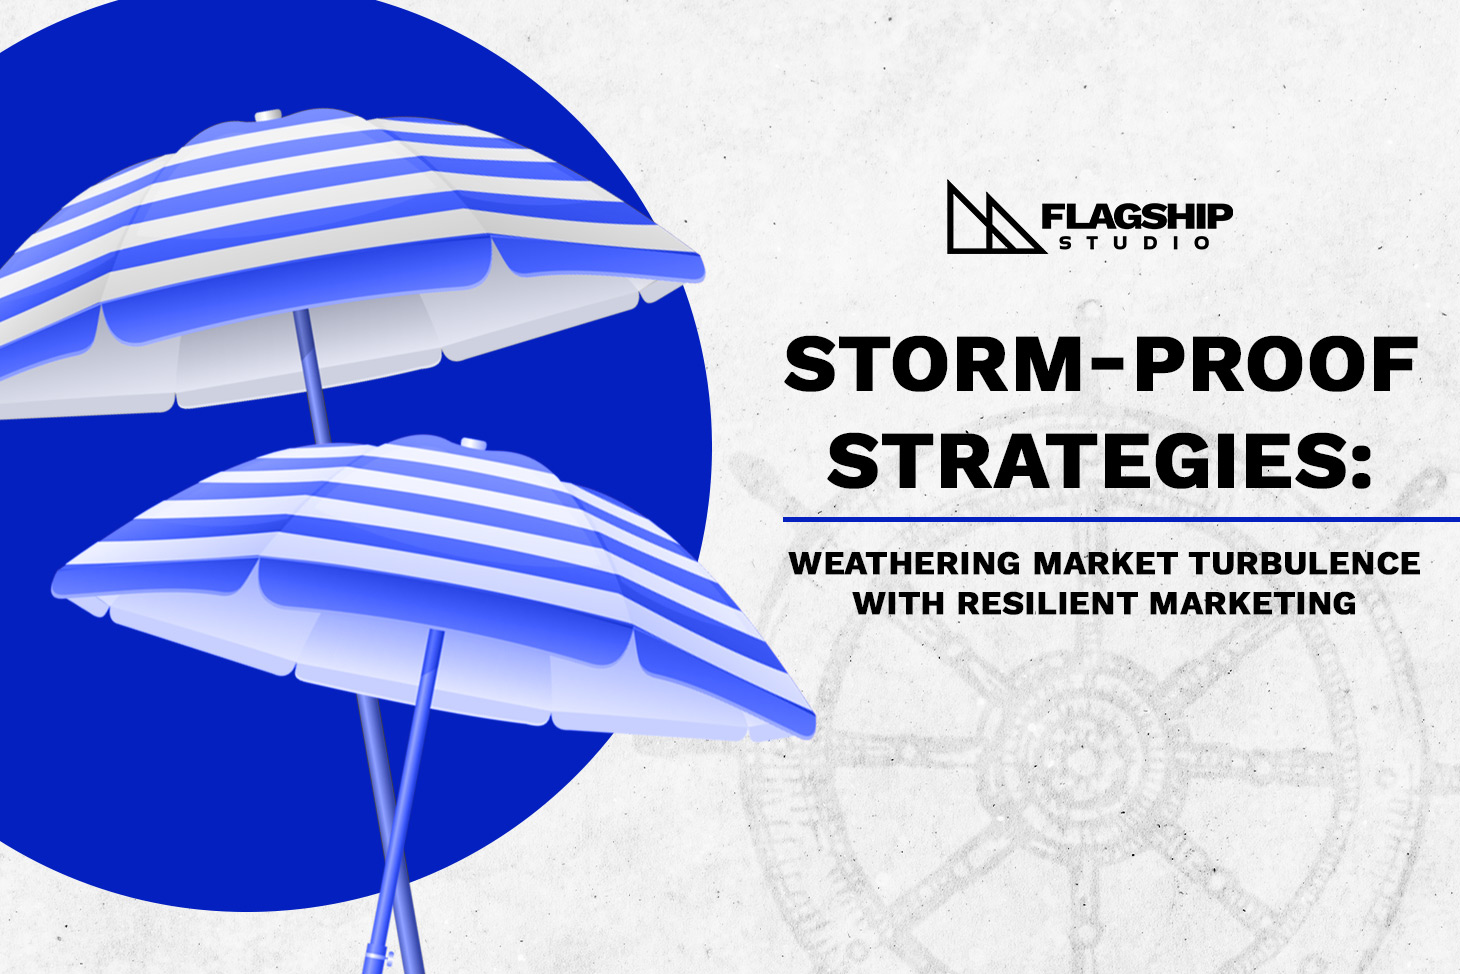 Storm-Proof Strategies: Weathering Market Turbulence with Resilient Marketing